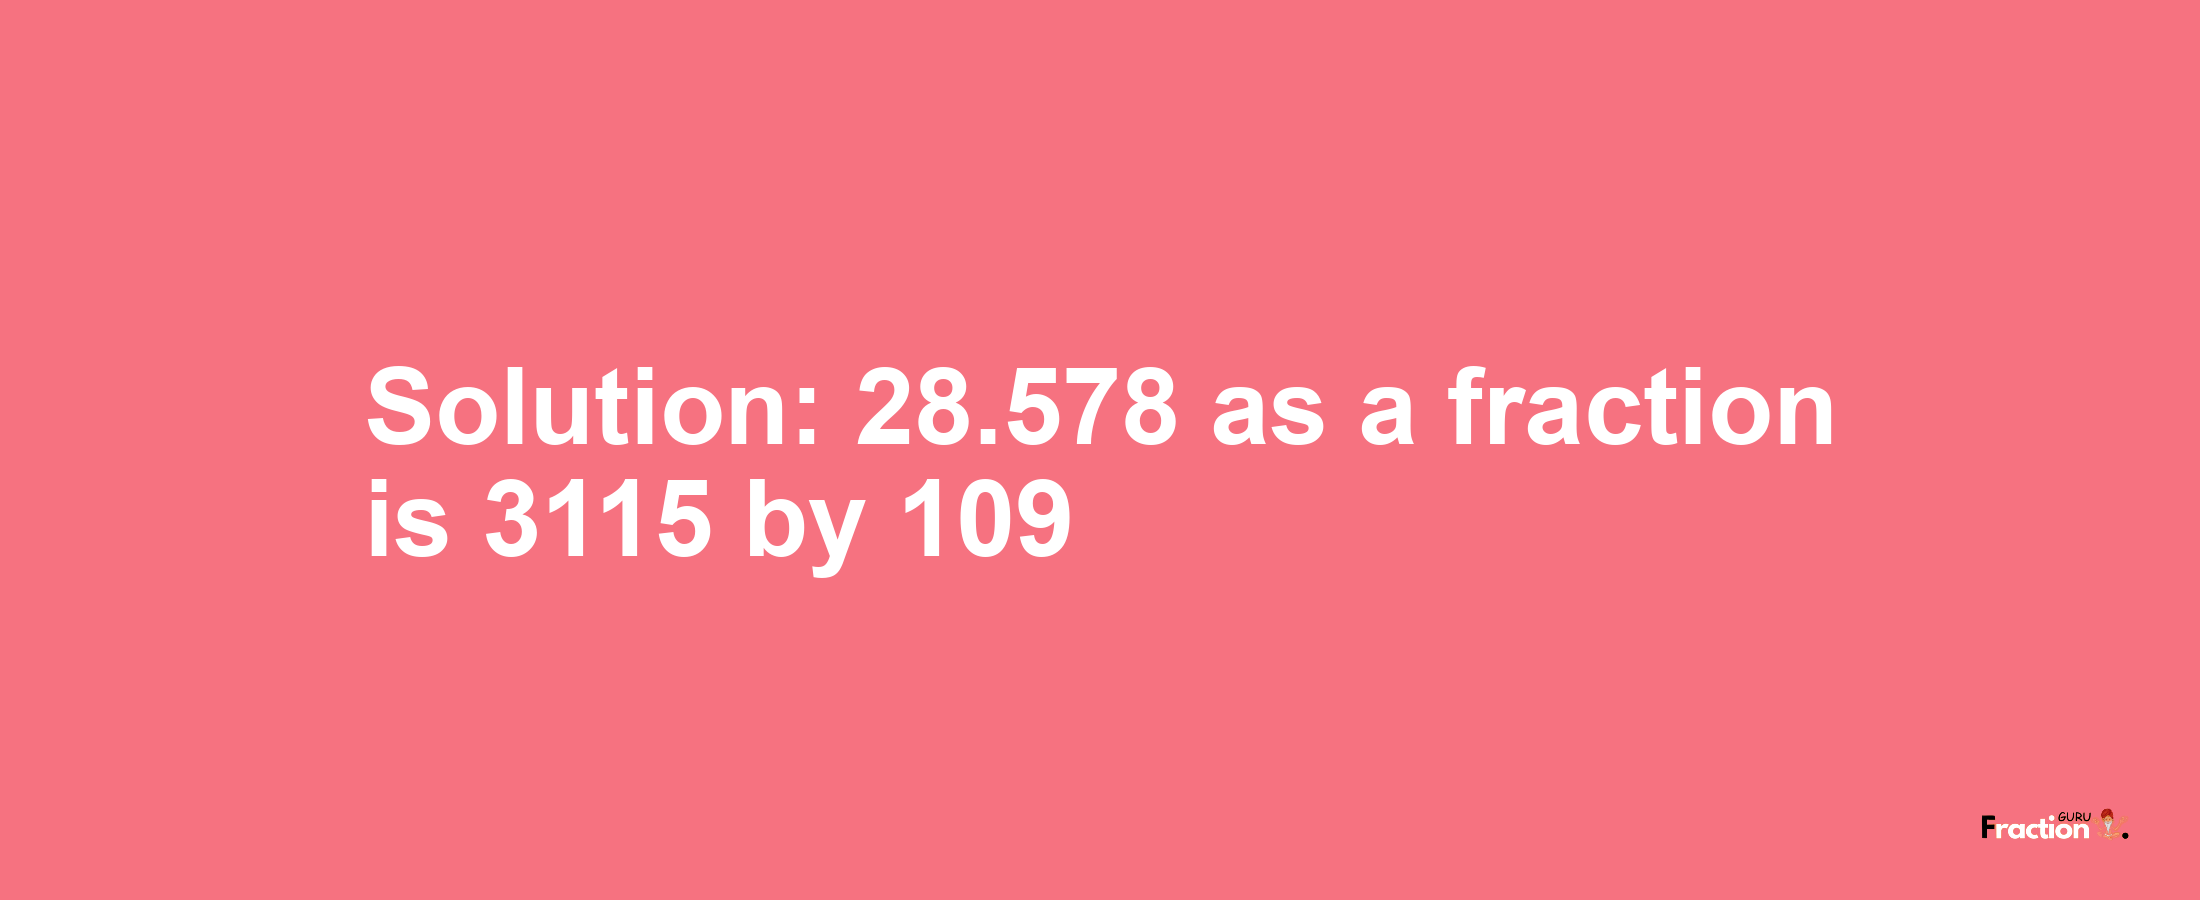 Solution:28.578 as a fraction is 3115/109